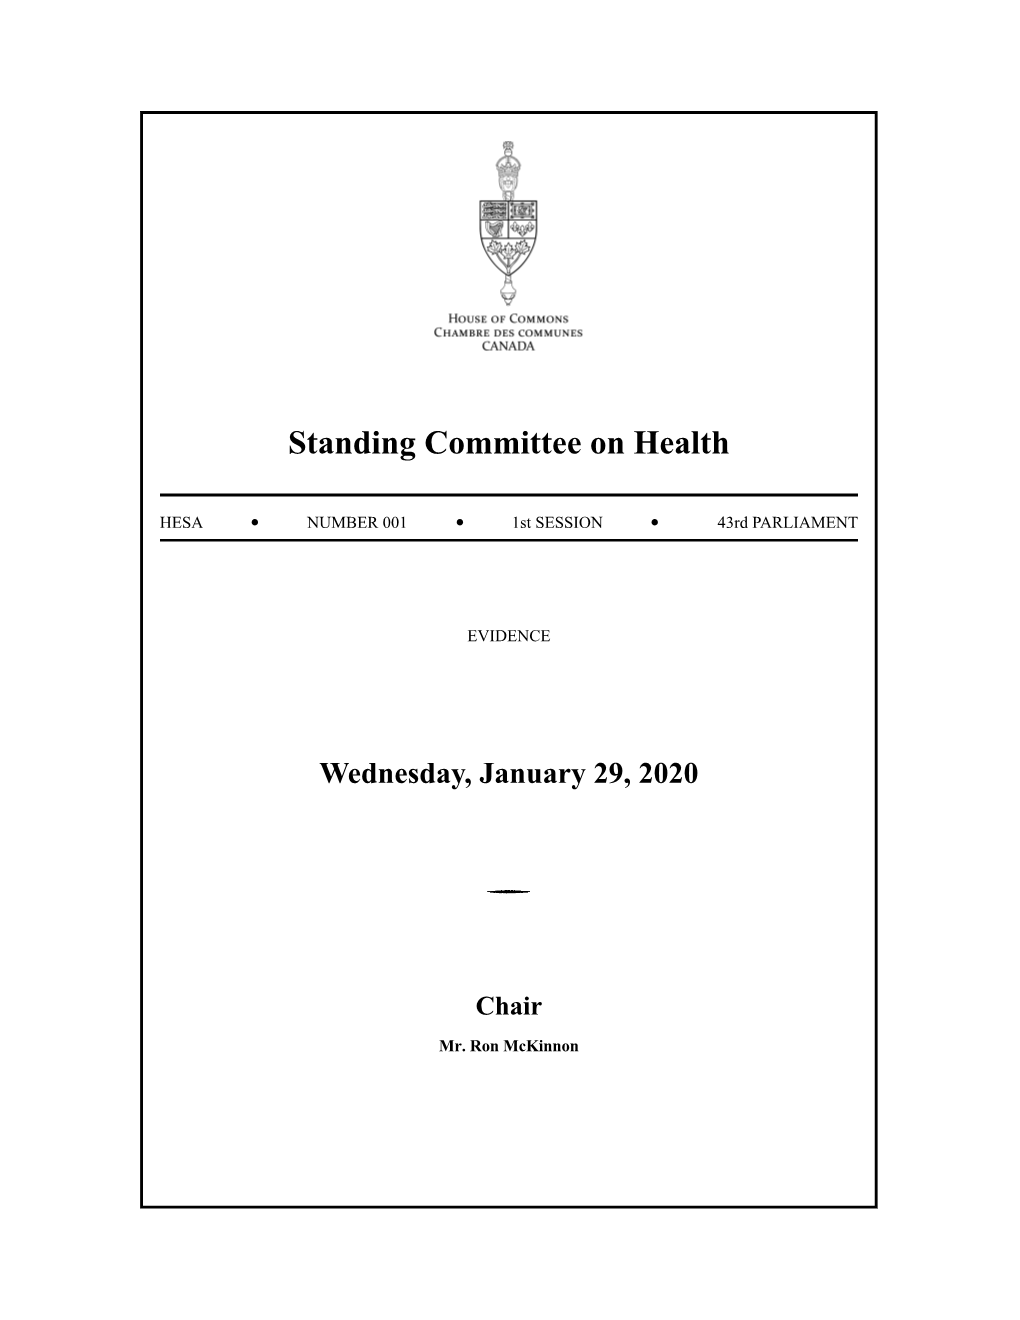 Evidence of the Standing Committee on Health